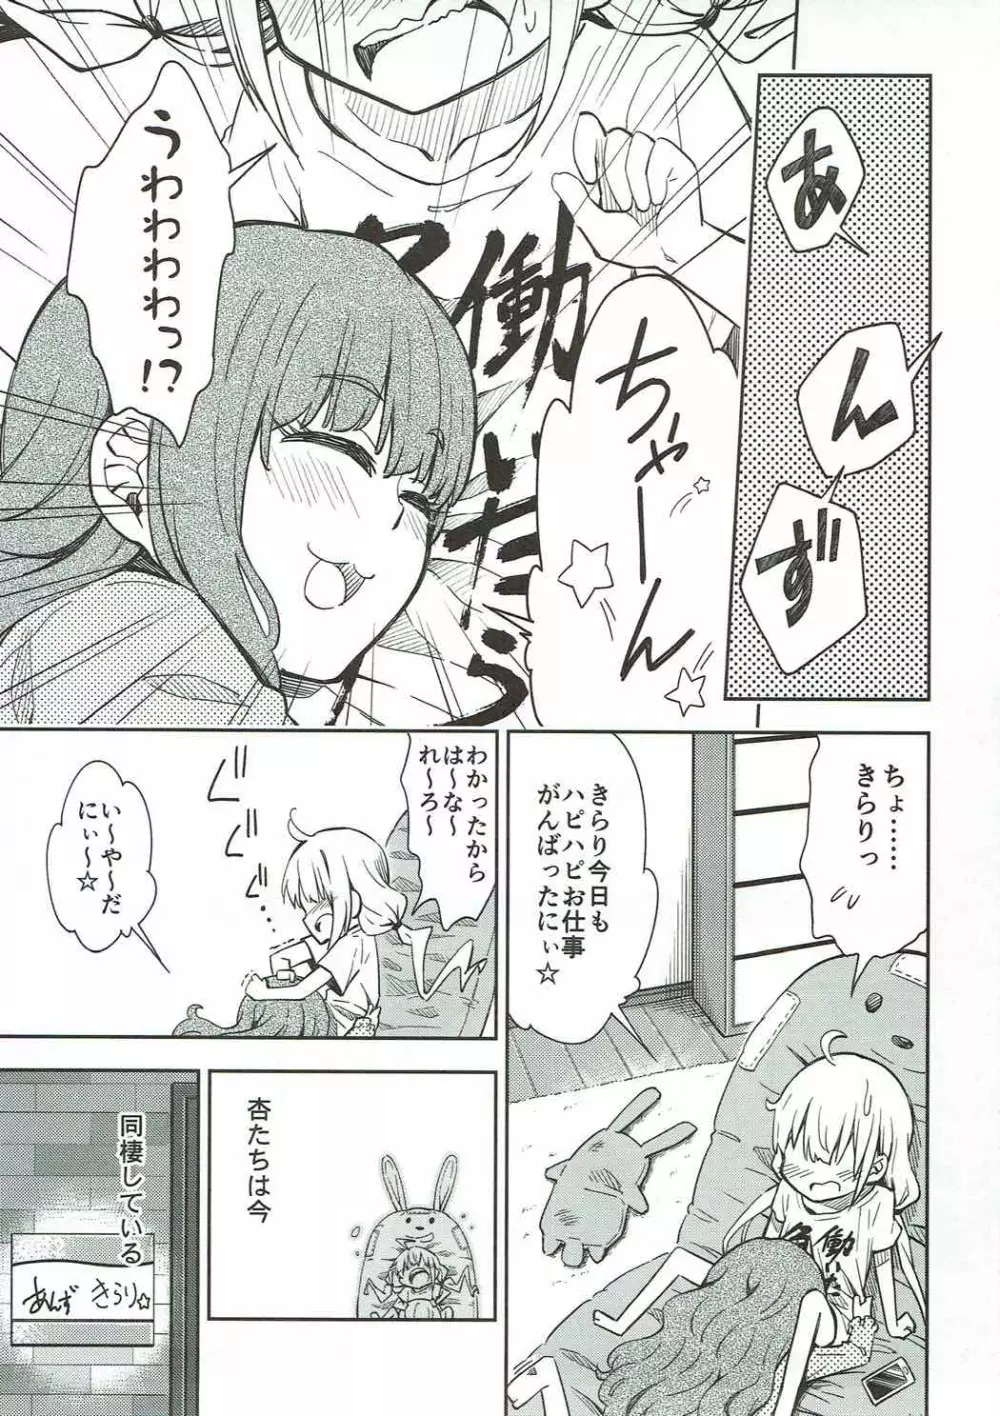 Lovely Girls' Lily vol.16 - page4